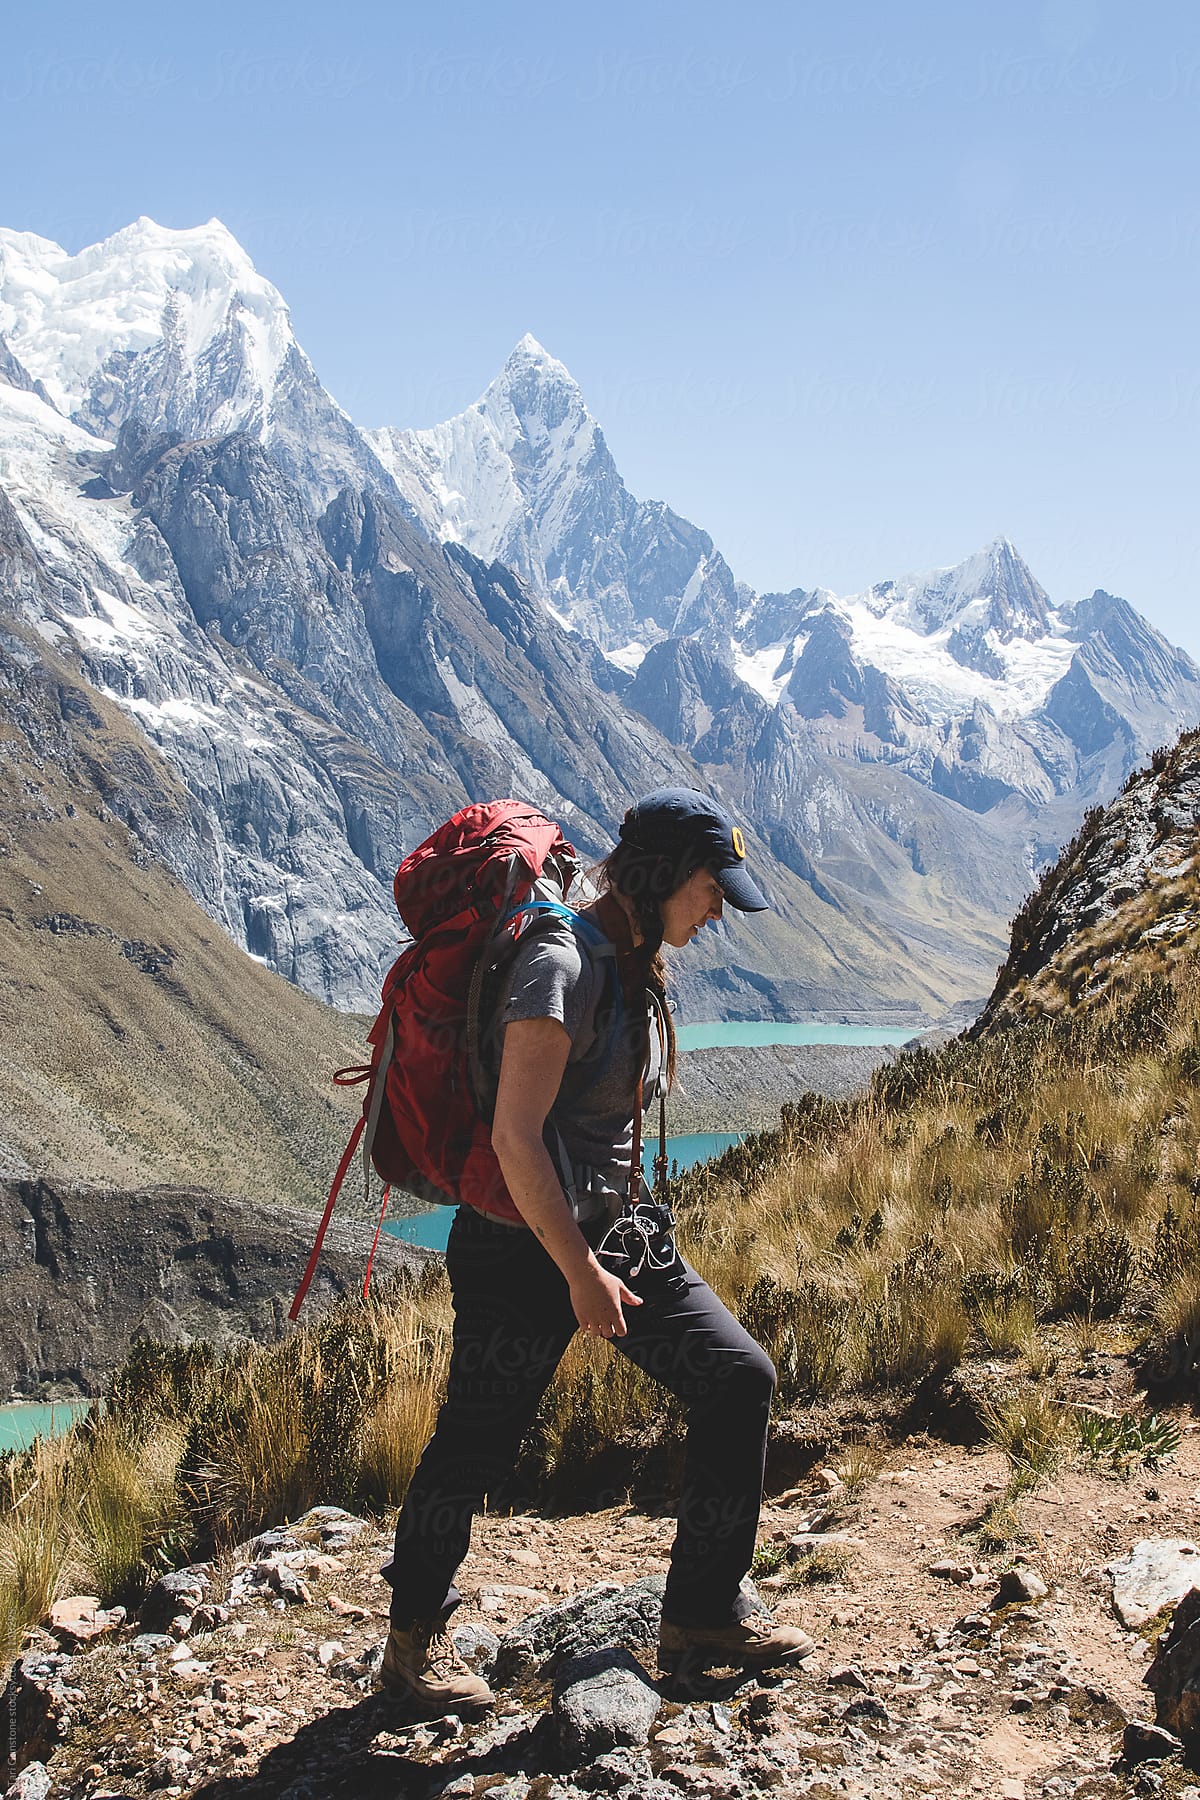 Backpacker hikes onward with rugged scenery in background